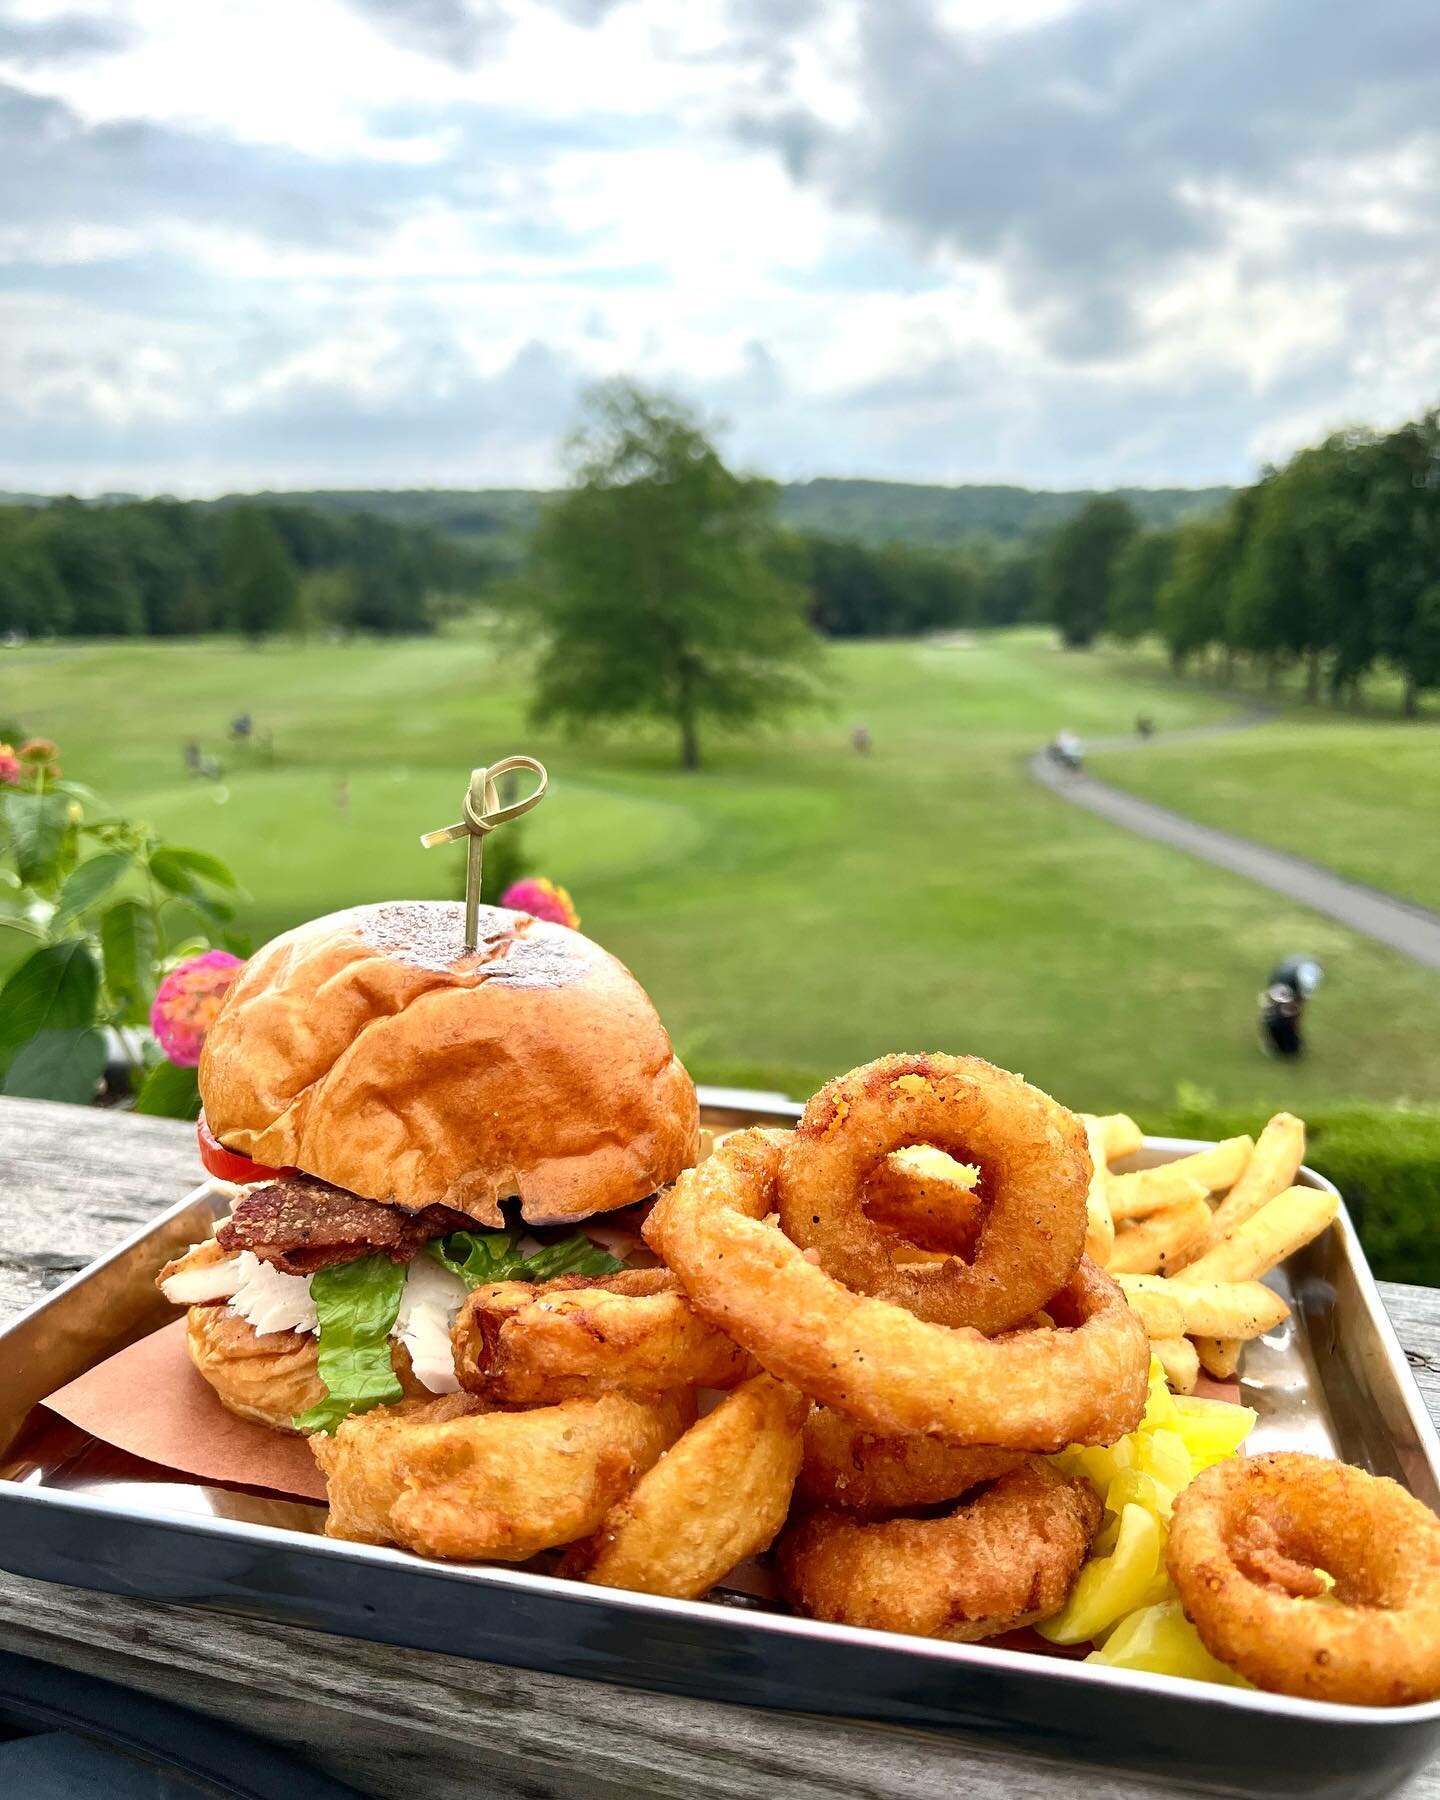 Looking for a casual, outdoor lunch spot in Ridgefield, CT?

We&rsquo;re open daily for breakfast, lunch and dinner. 

Based at Ridgefield&rsquo;s Public Golf Course (spot the gorgeous views of the course) but you don&rsquo;t need to be a golfer to d